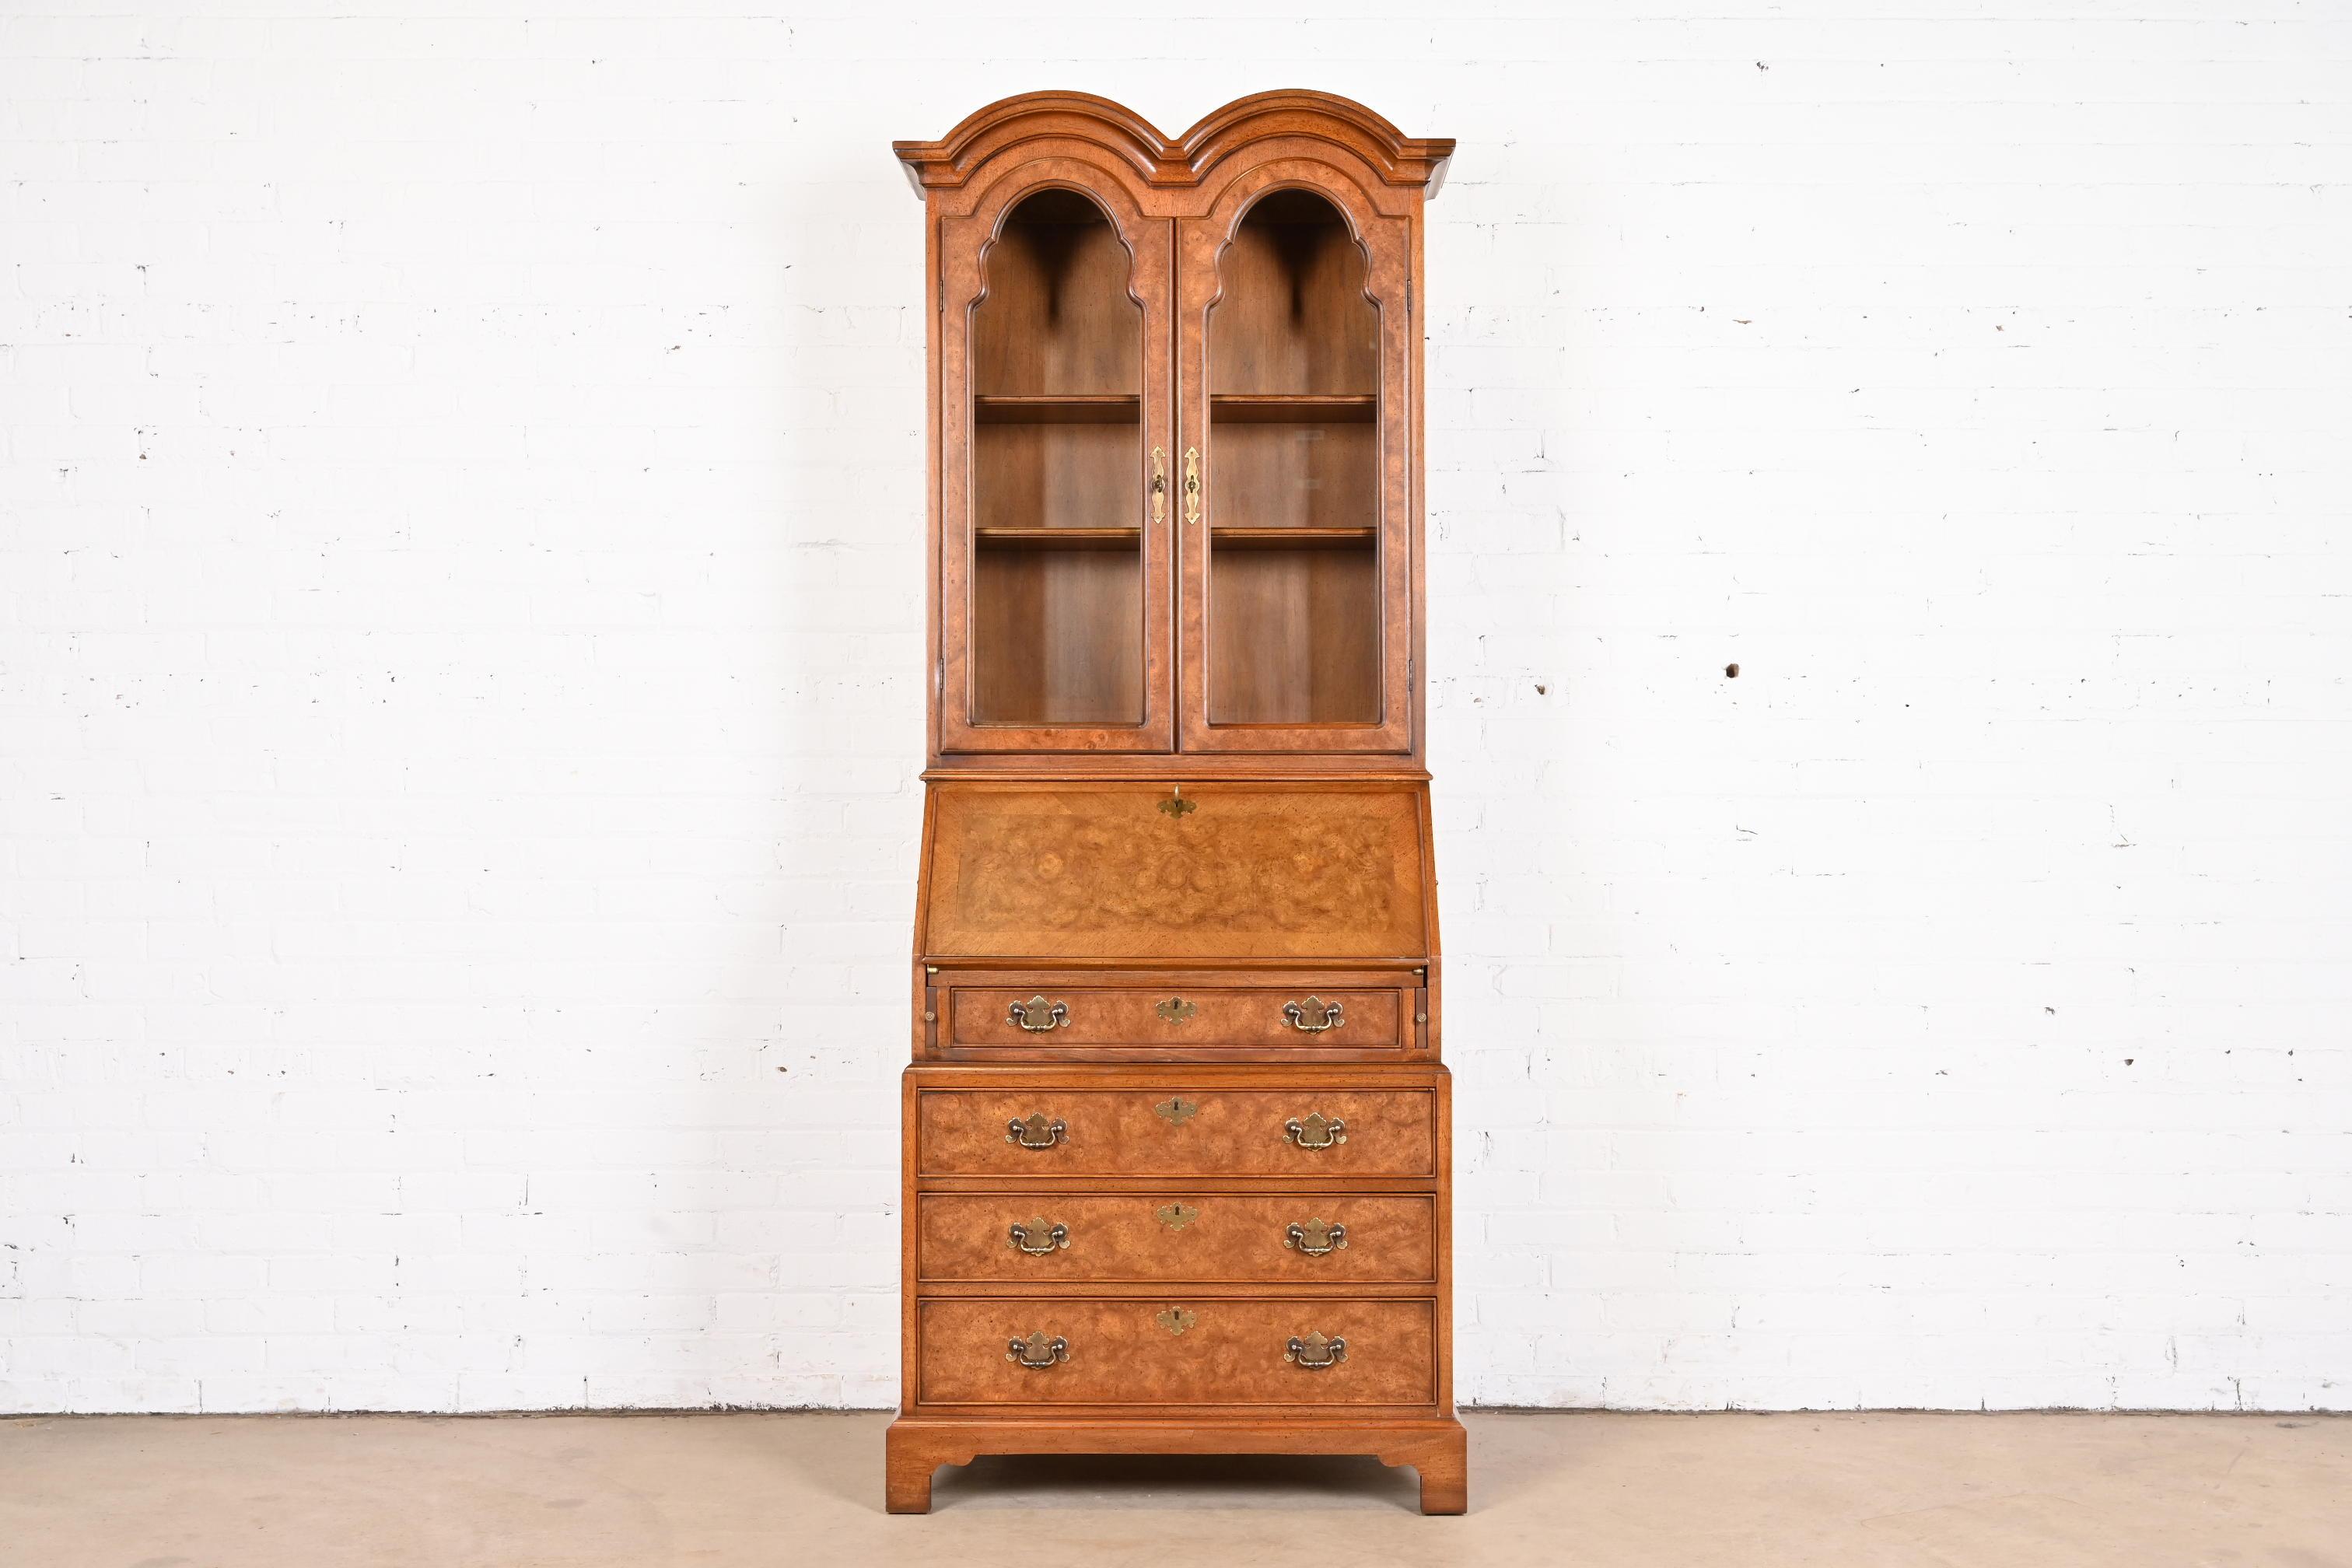 A beautiful Georgian or Queen Anne style bureau with drop front secretary desk and bookcase hutch top

By John Stuart

USA, circa 1960s

Gorgeous burled walnut, with leather writing surface, original brass hardware, and glass front